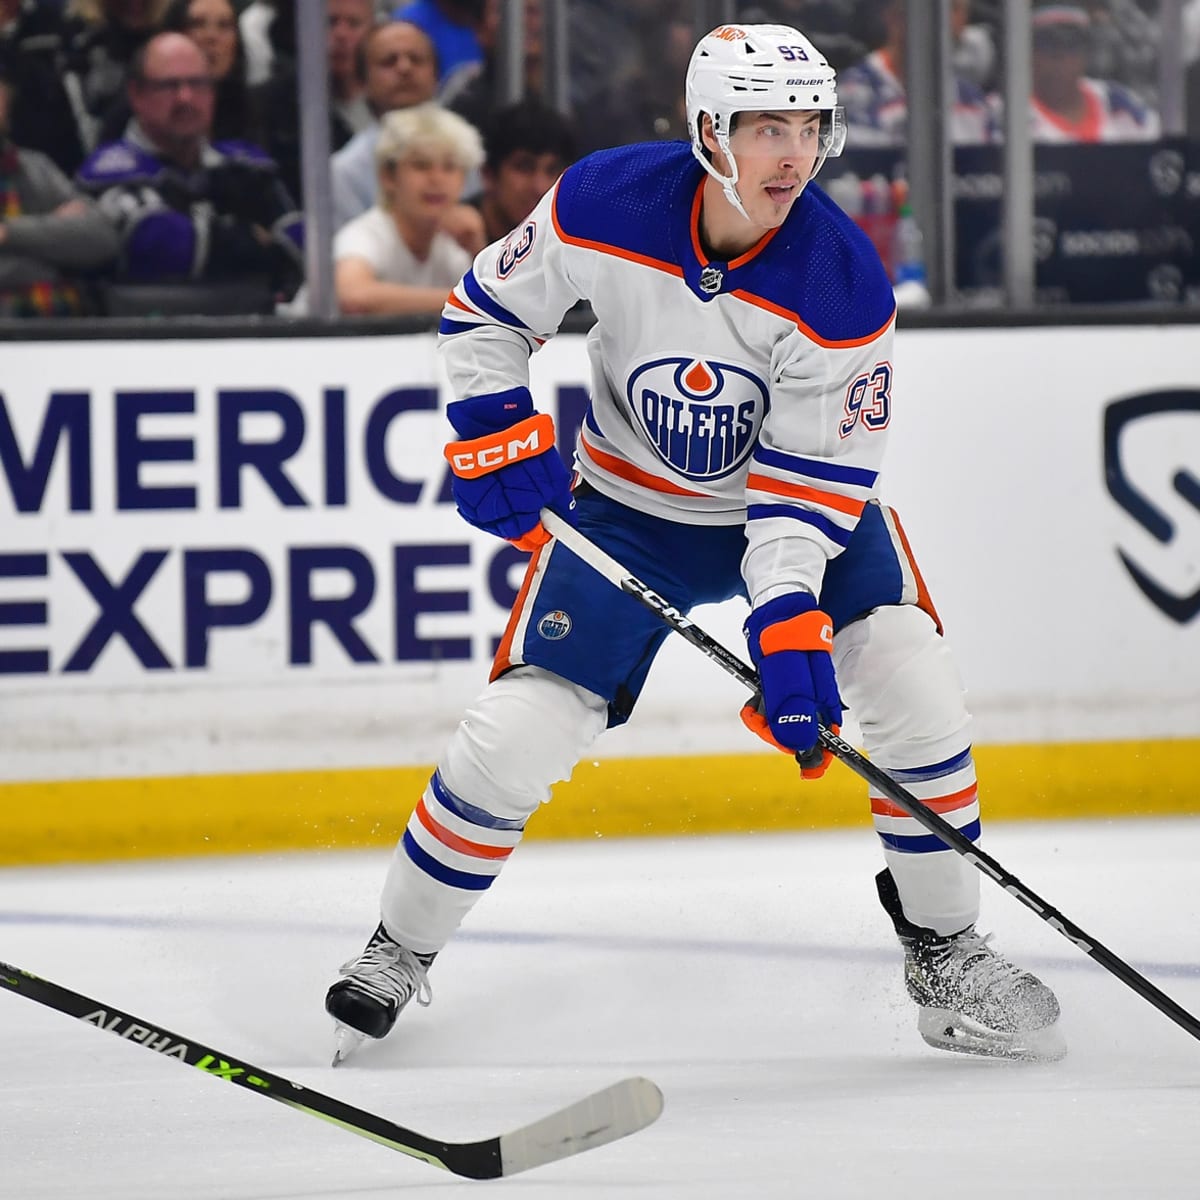 And just like that, Oscar Klefbom becomes the first Edmonton Oiler